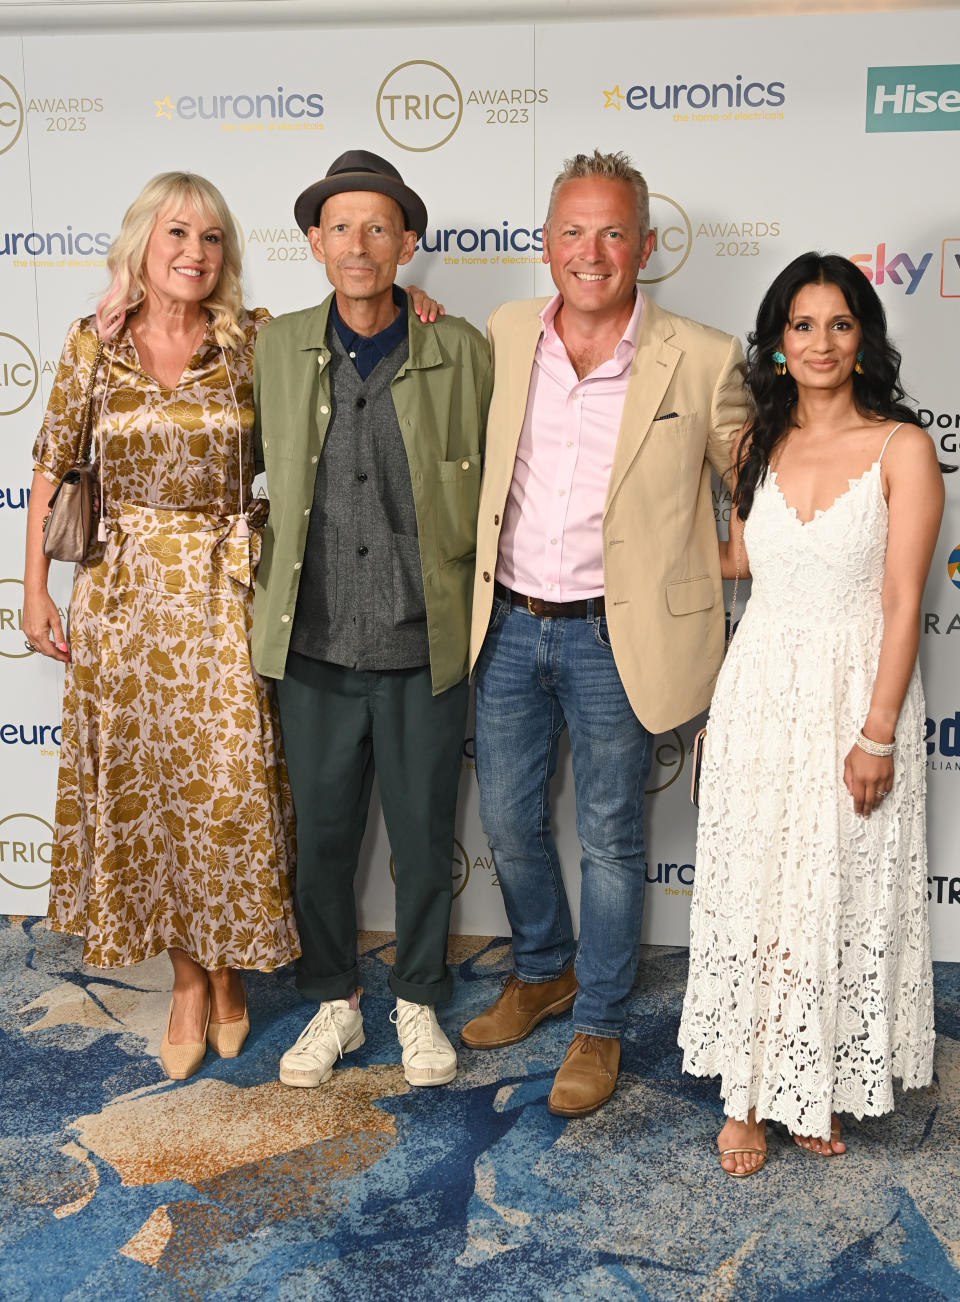 LONDON, ENGLAND - JUNE 27: (L-R) Nicki Chapman, Jonnie Irwin, Jules Hudson and Sonali Shah attend The TRIC Awards 2023 at Grosvenor House on June 27, 2023 in London, England. (Photo by Kate Green/Getty Images)